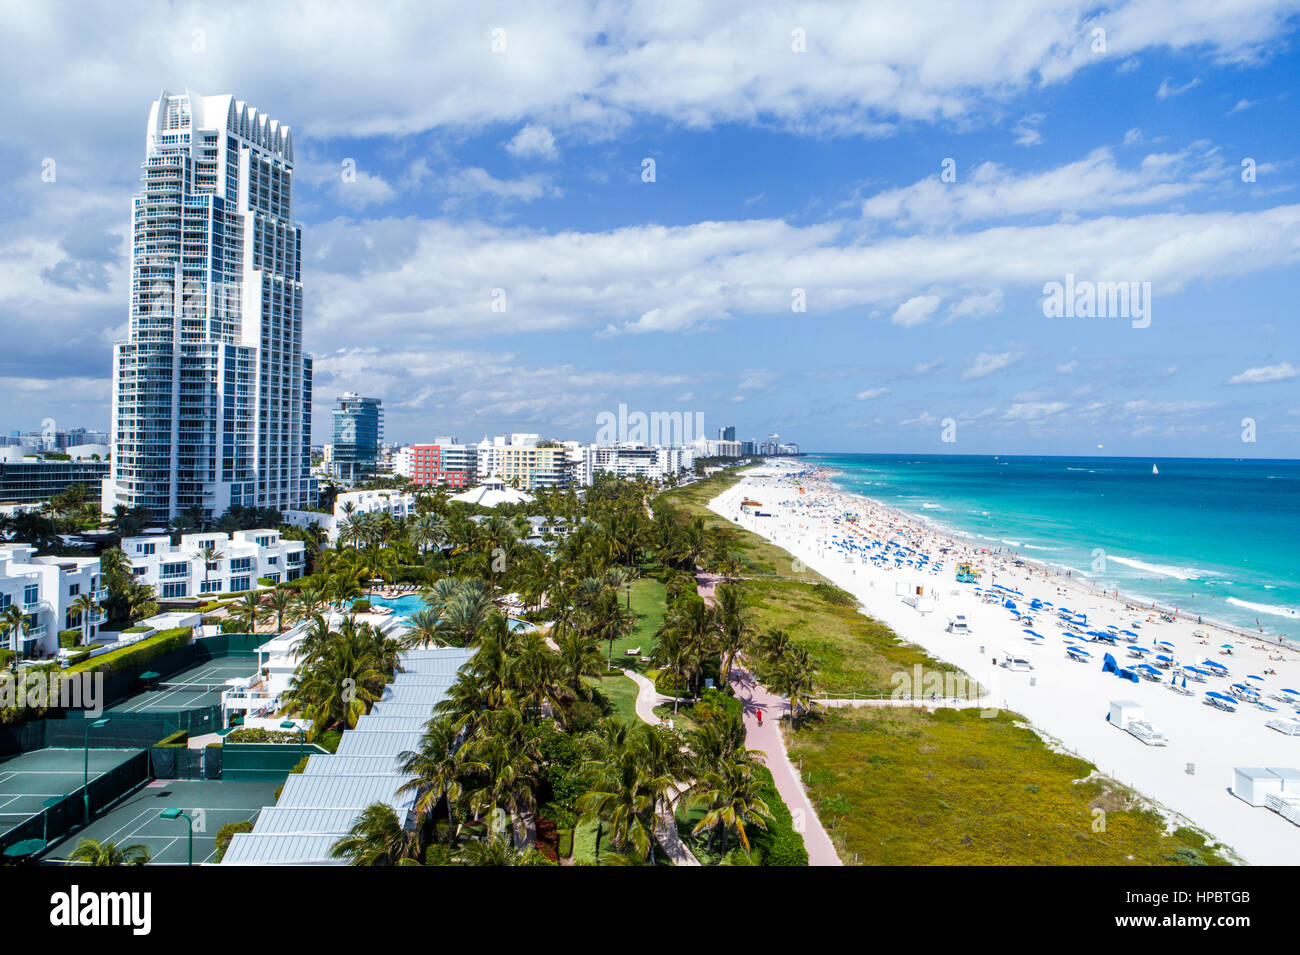 Miami Beach Florida,Atlantic Ocean,shore,shoreline,water,Continuum,high rise residential building,aerial overhead from above view,FL170220012 Stock Photo